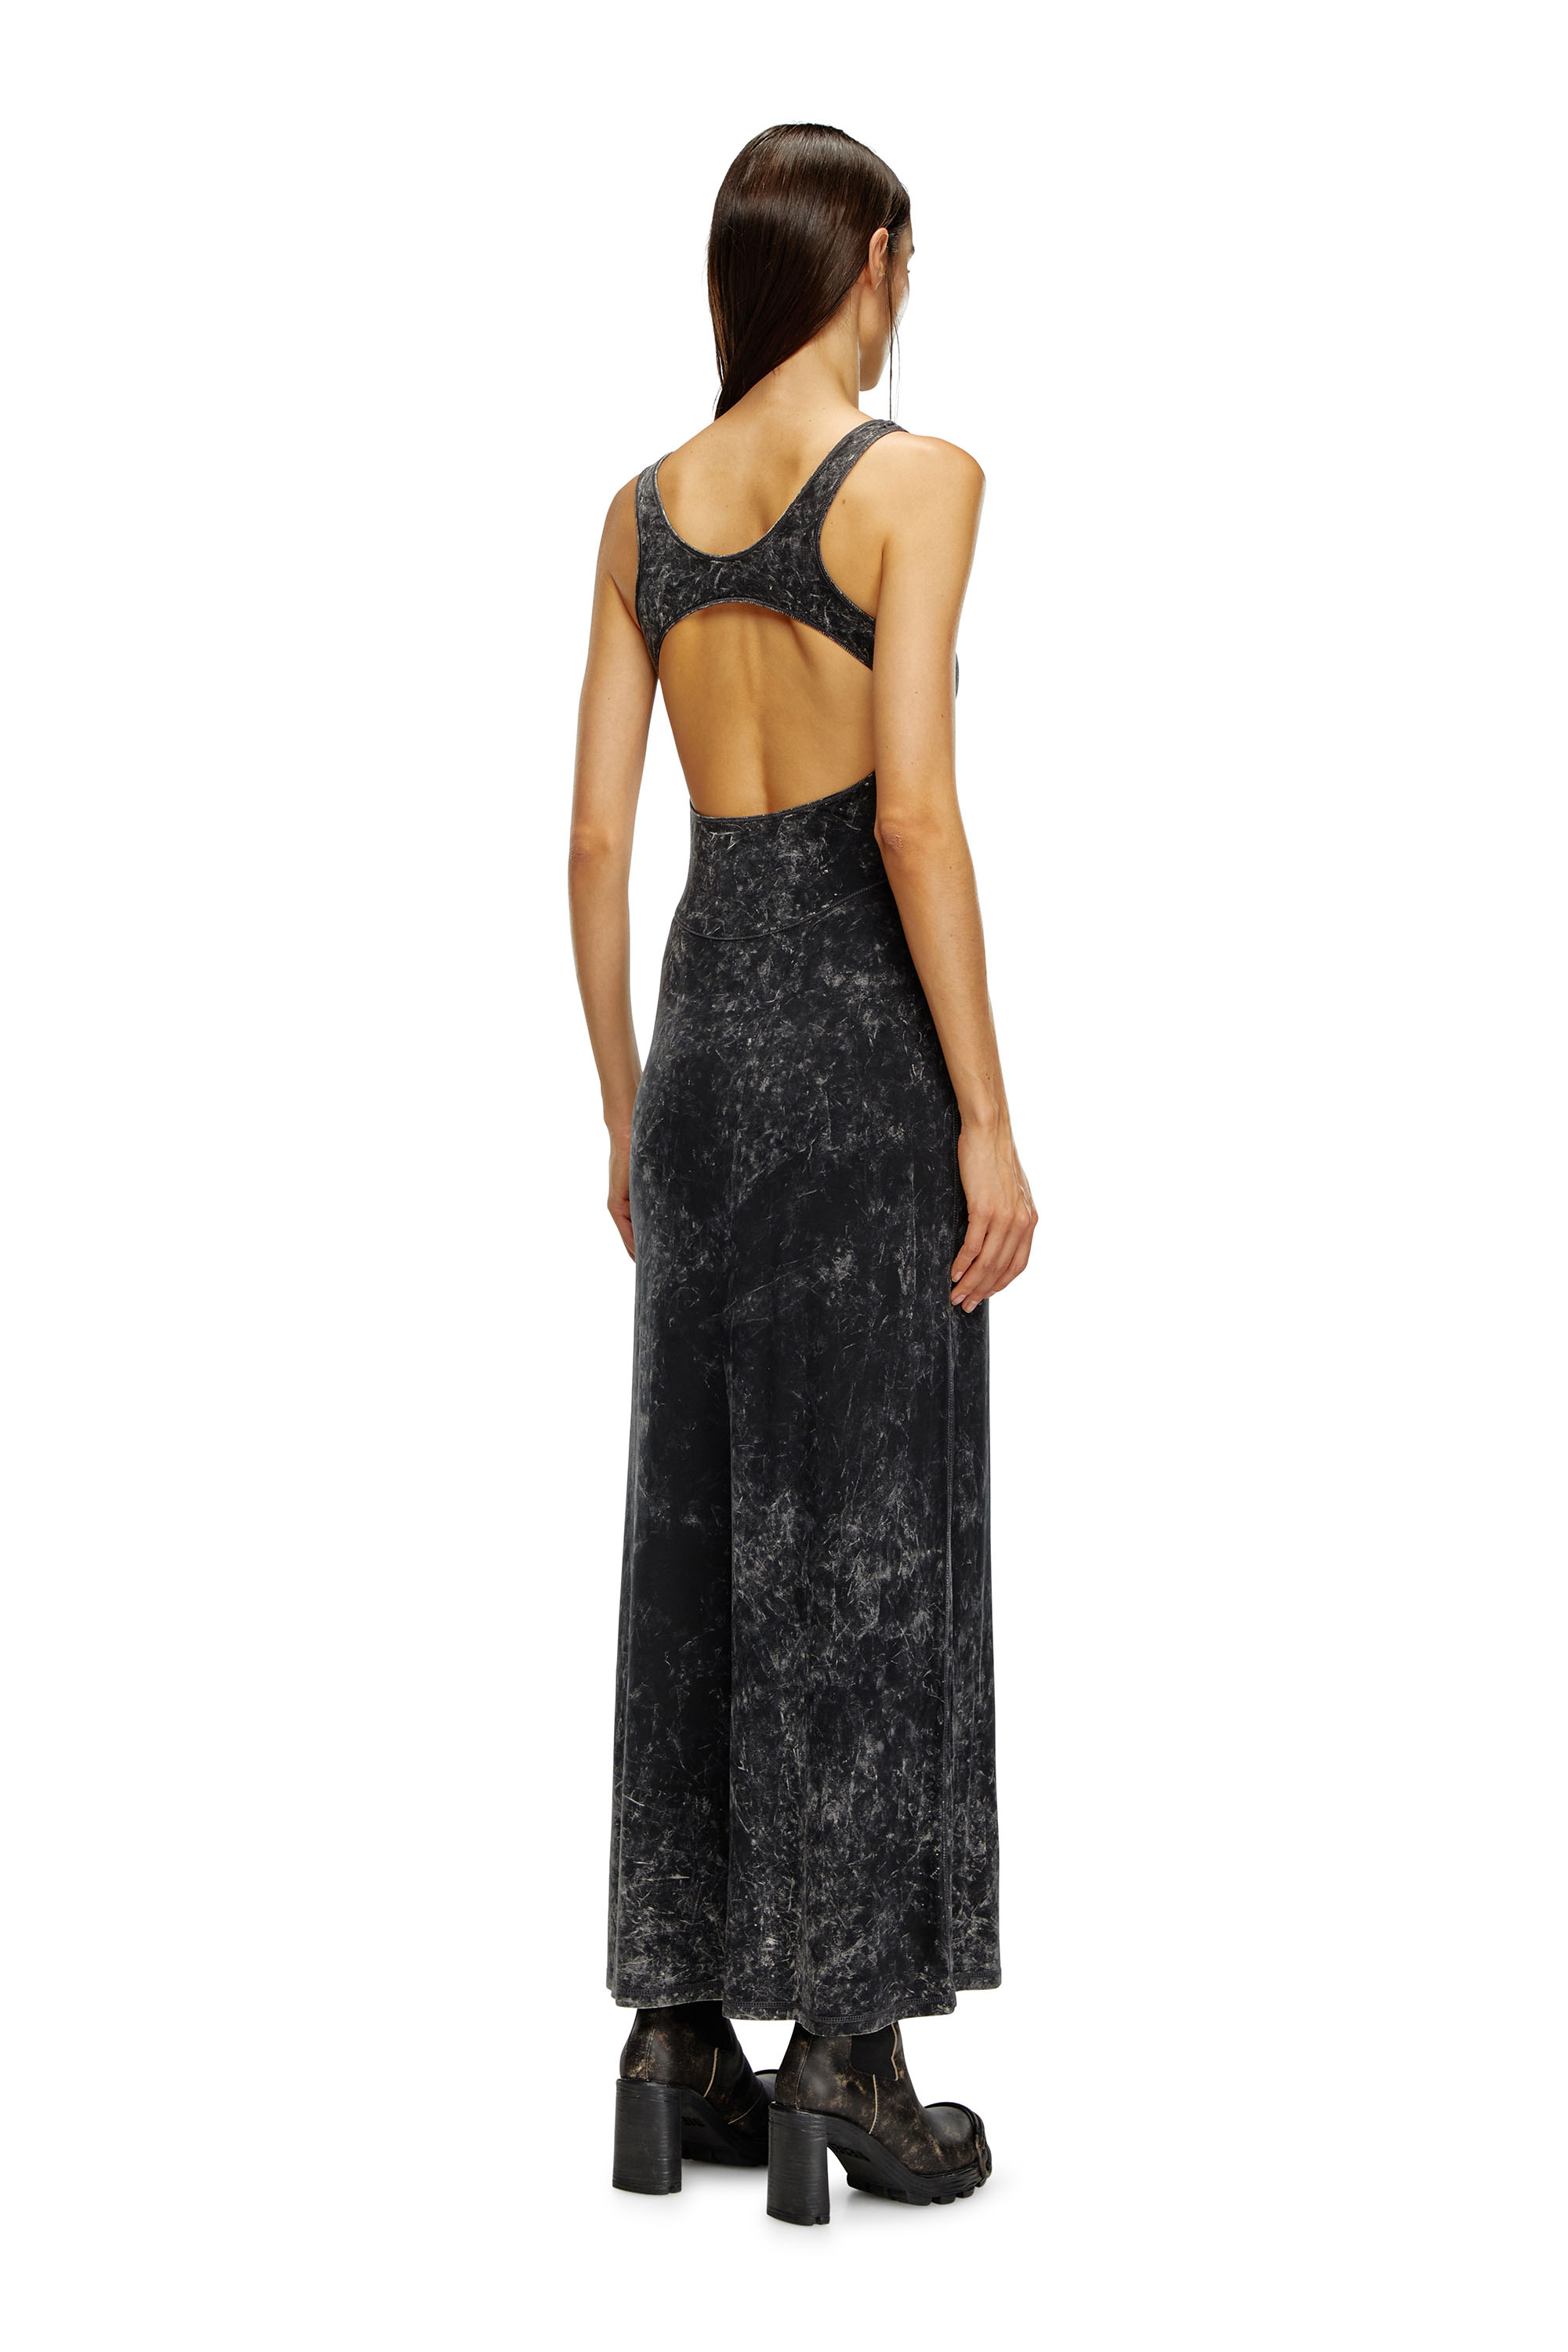 Diesel - D-AVENA-P1, Female Maxi dress in marbled stretch jersey in ブラック - Image 2